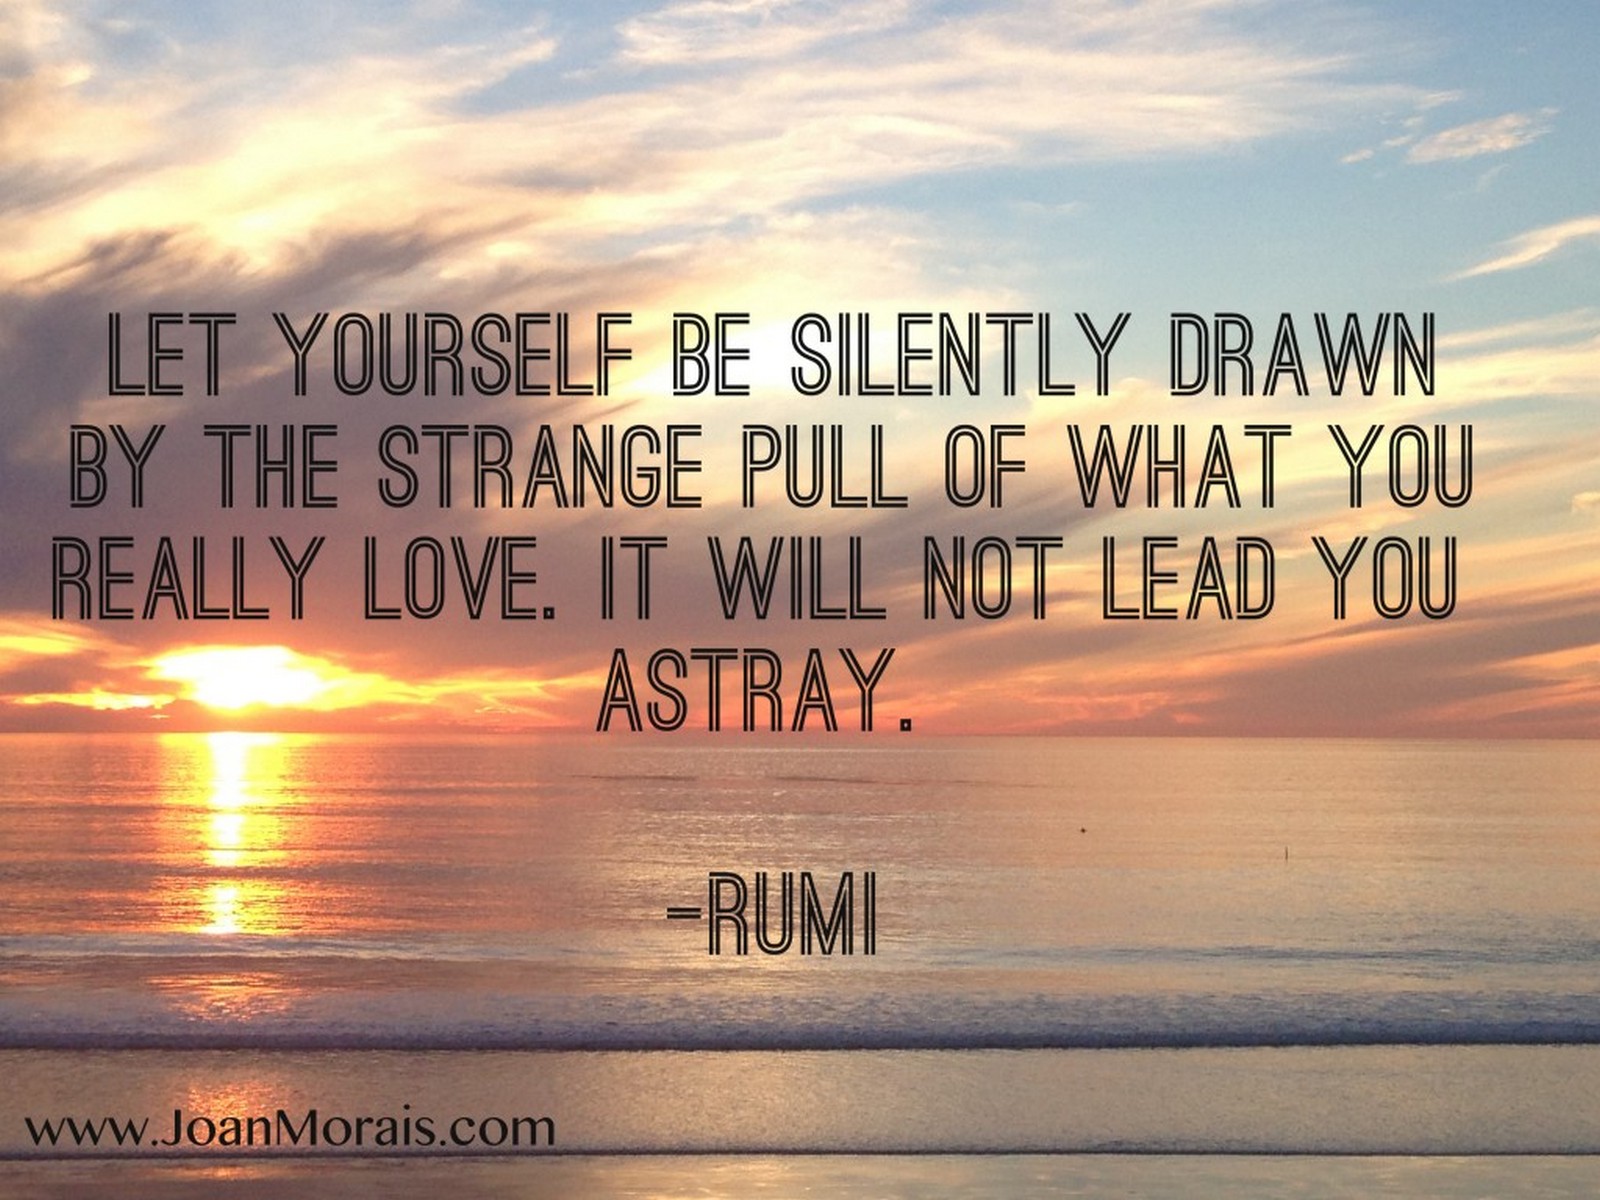 27 Rumi Quotes That Will Change Your Life & Teach You to Trust Yourself